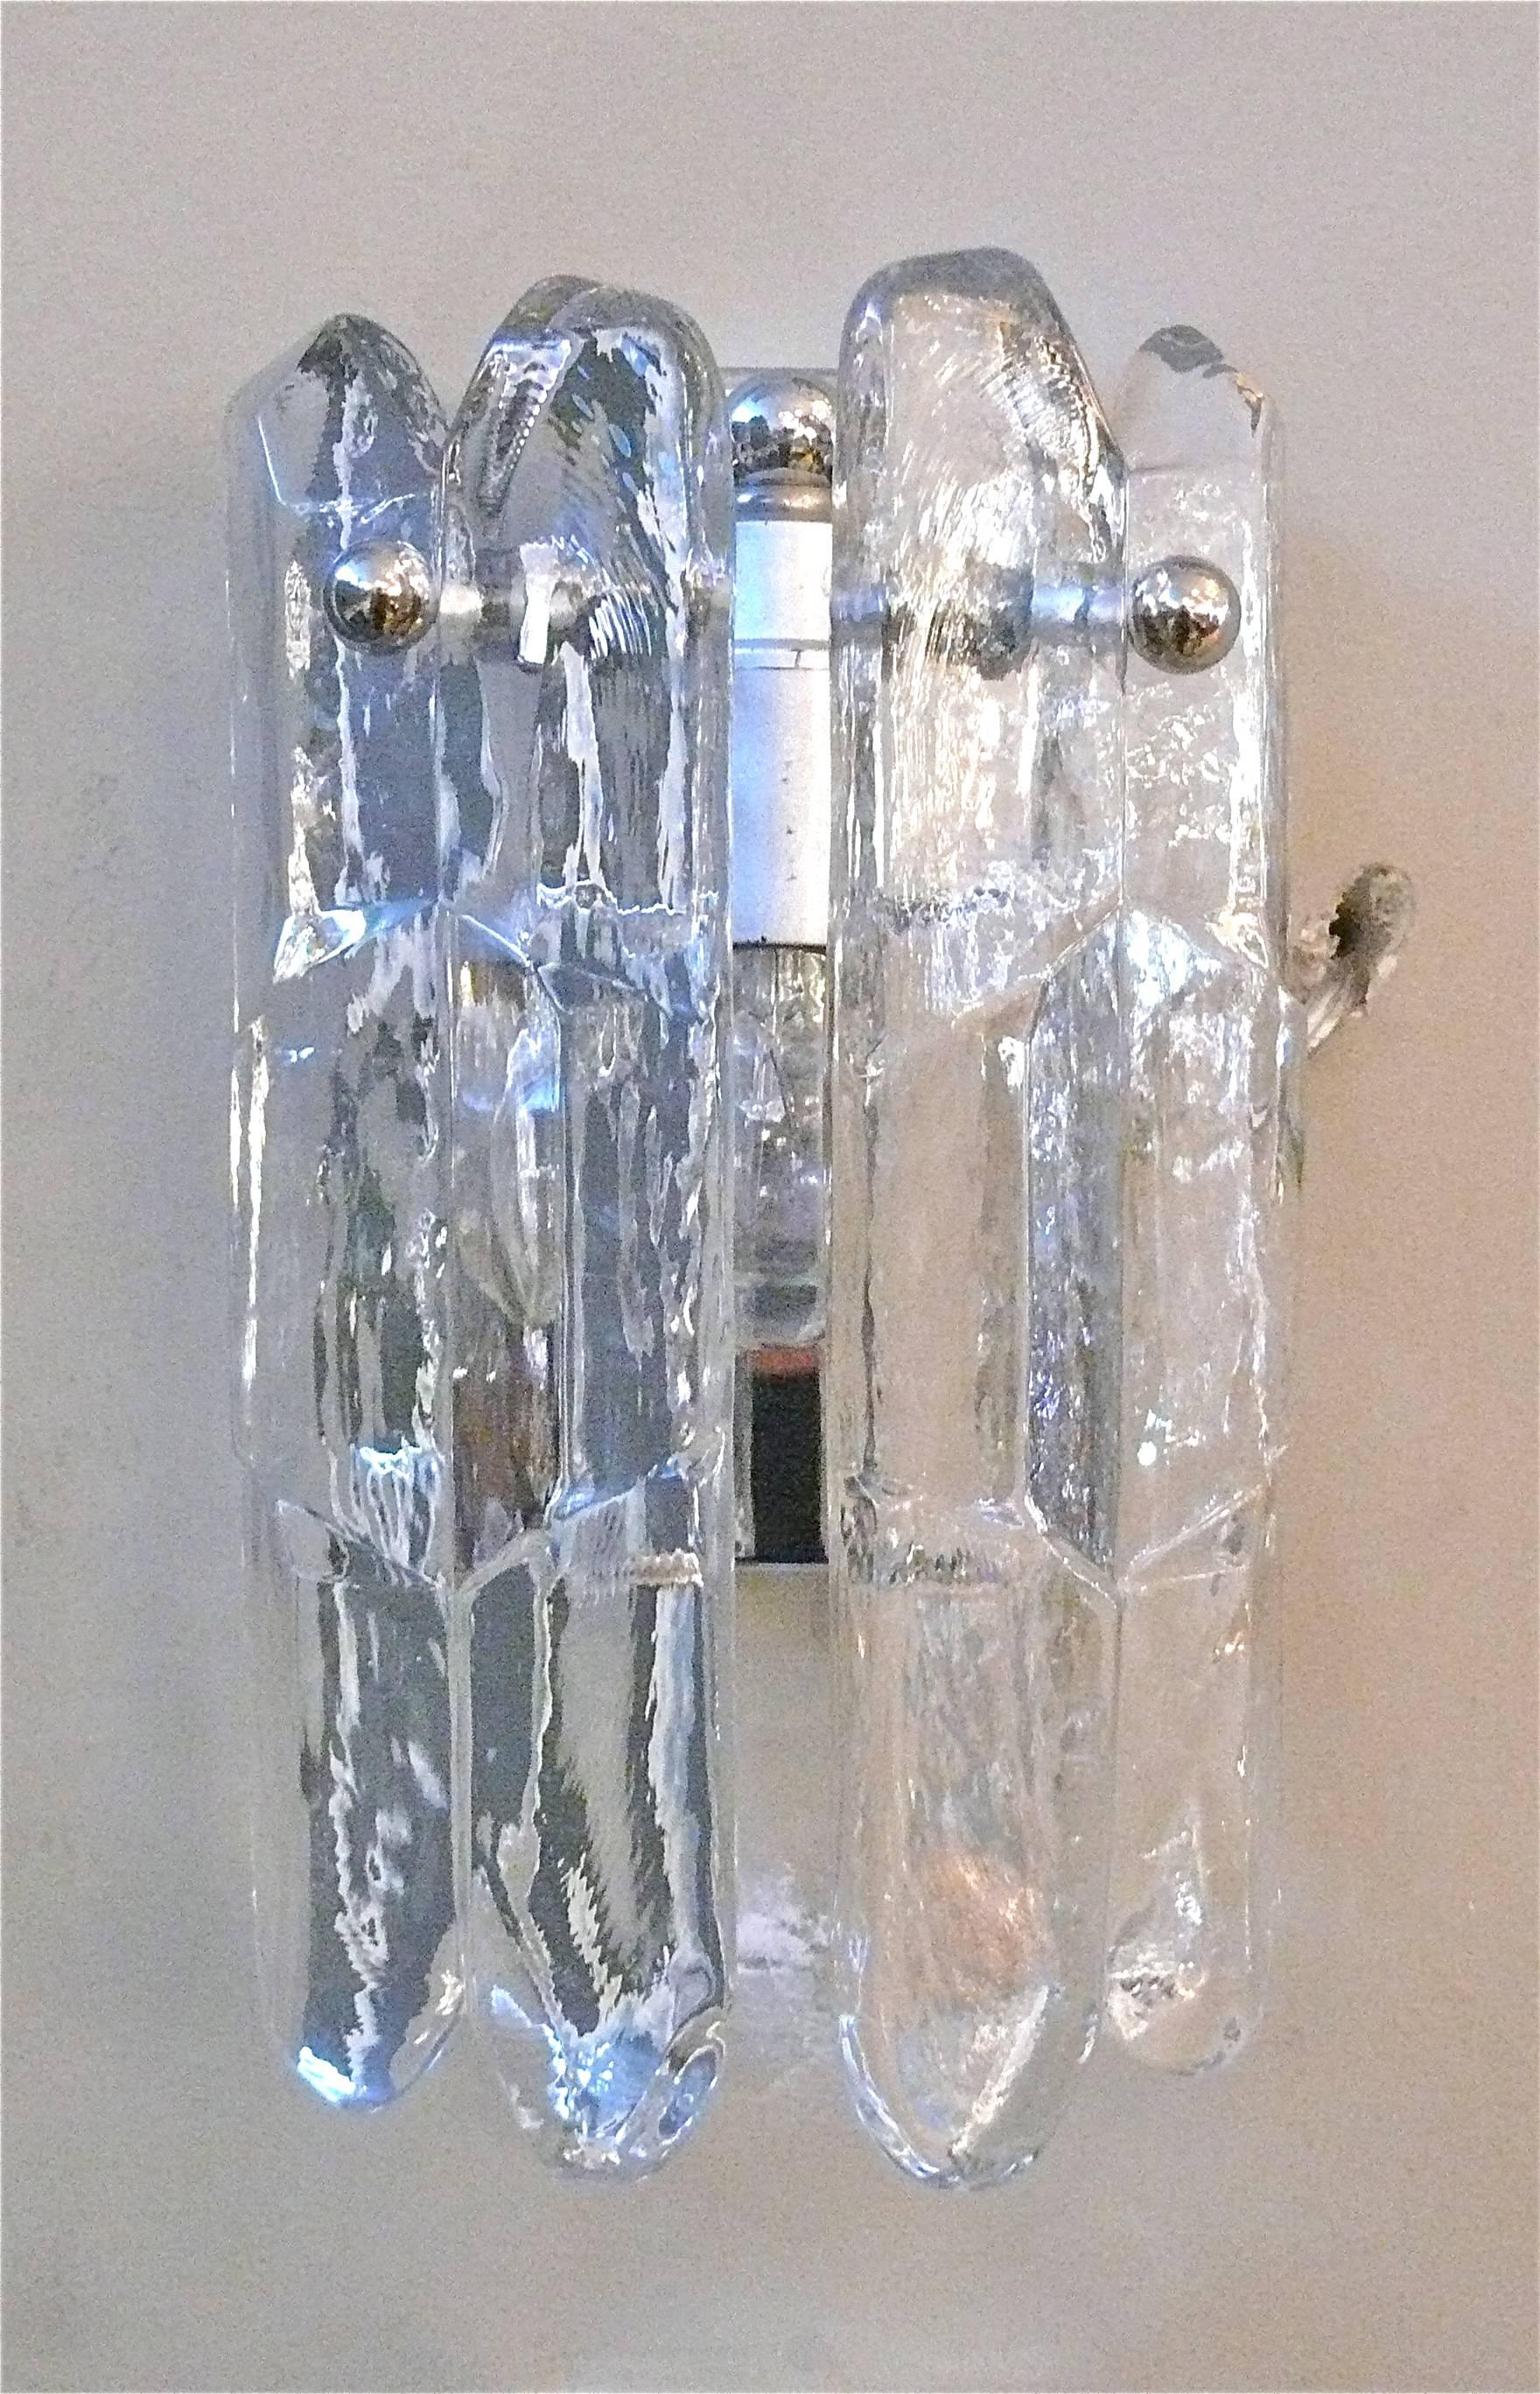 Pair of petite Kalmar Sconces with two icicle sheets of glass that hang from polished nickel finials. Gorgeous texture to glass and nickel backplates. Professionally rewired. Priced as a pair.